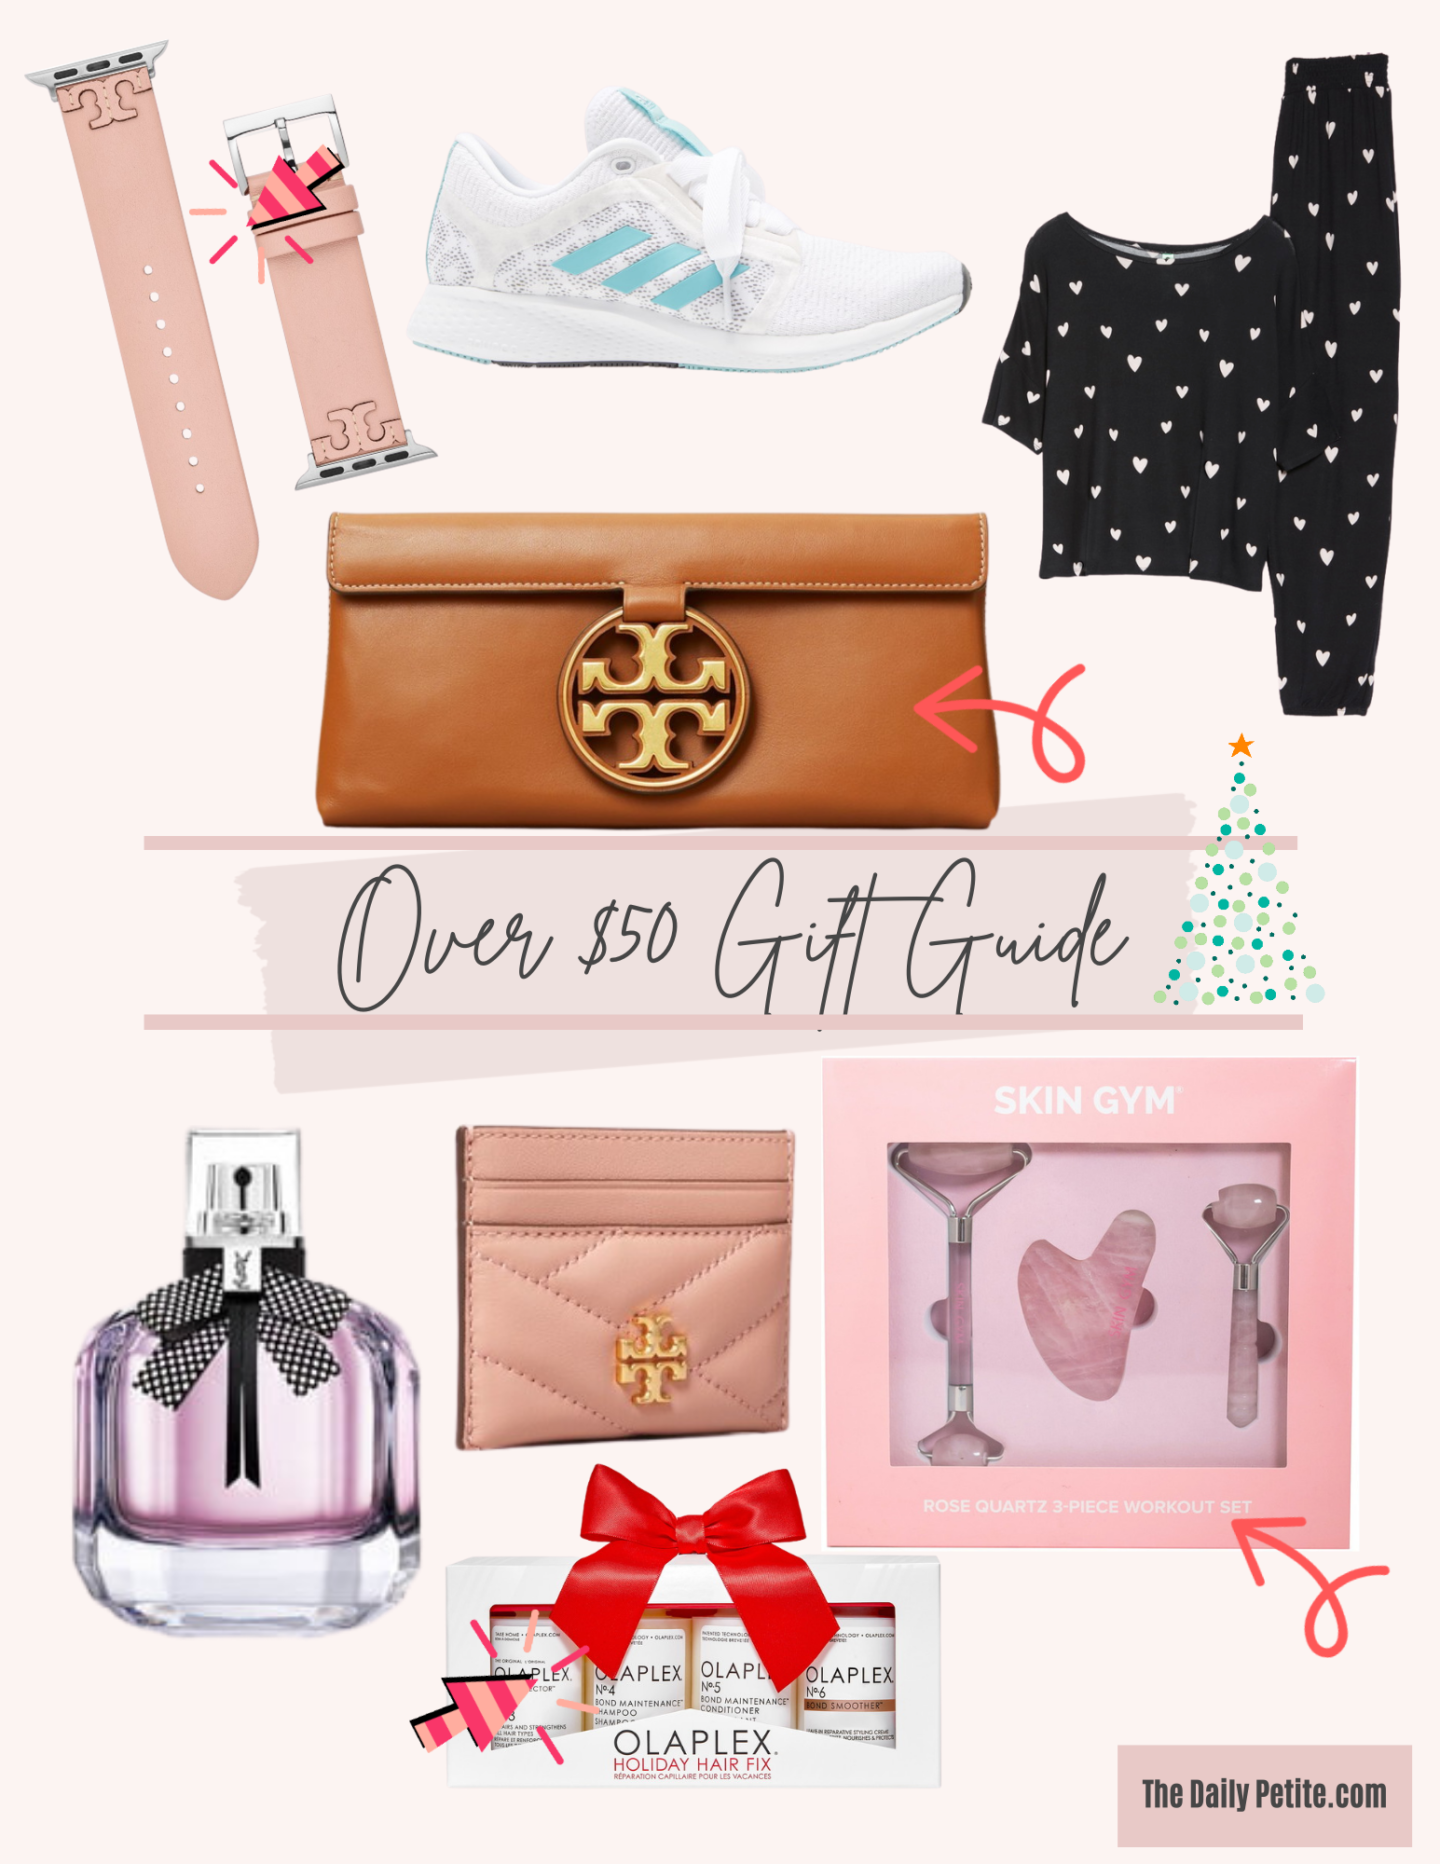 Over $50 gift guide 